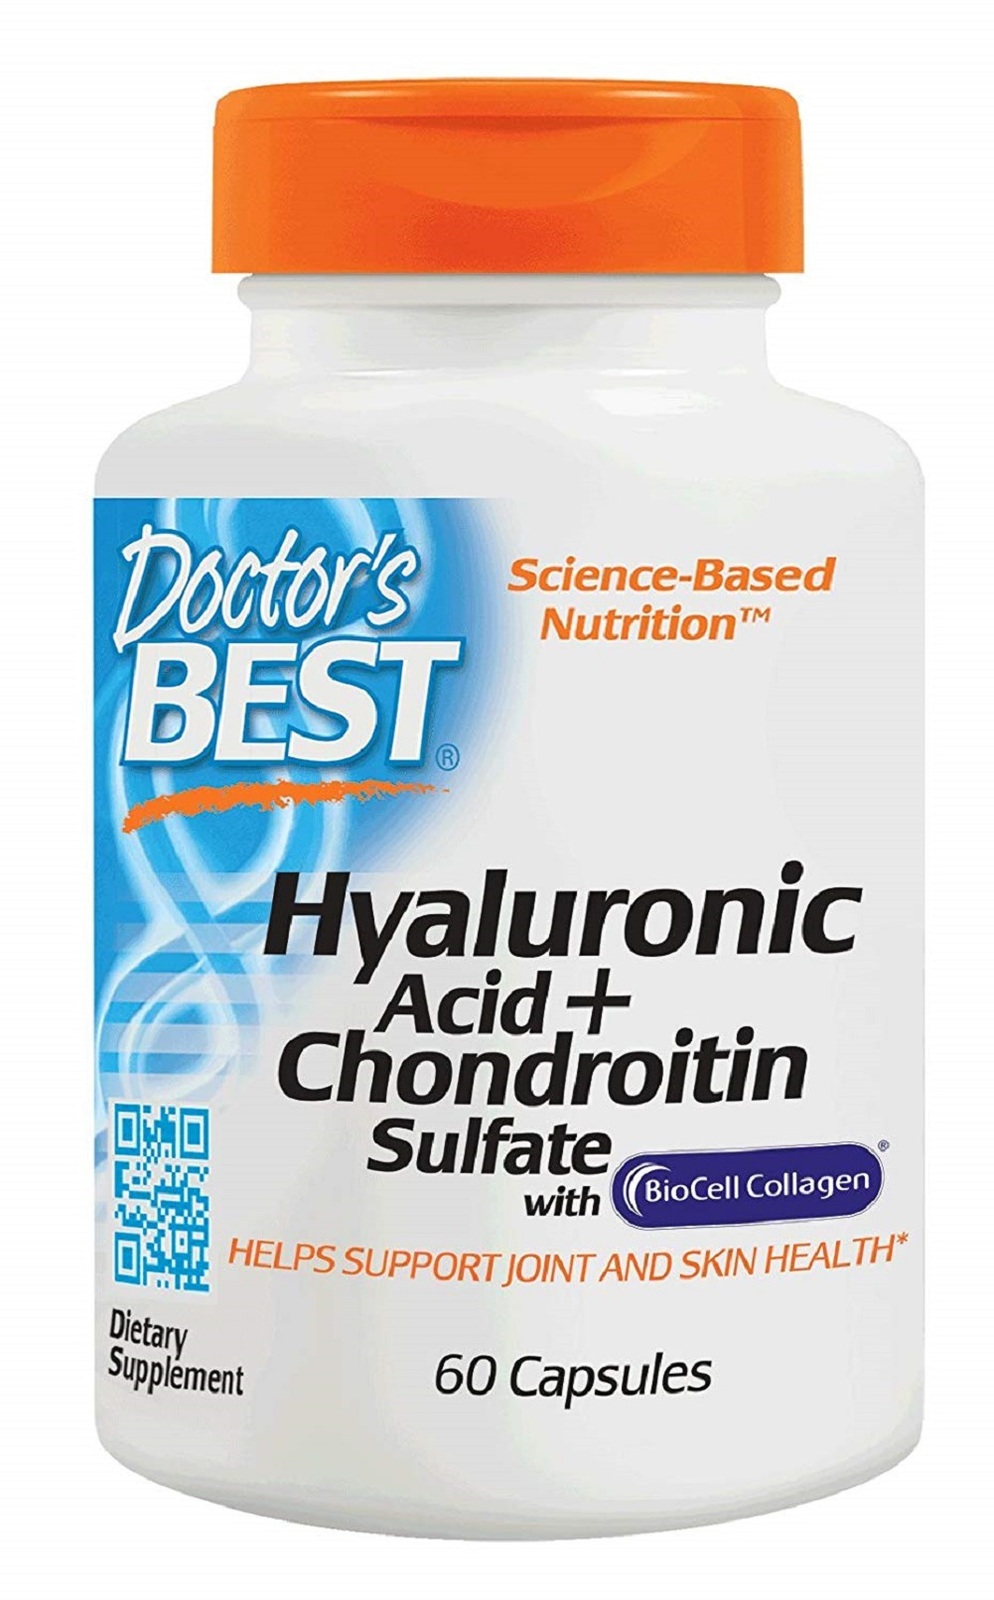 Hyaluronic Acid with Chondroitin Sulfate Joint Support and Skin Health 60 Caps